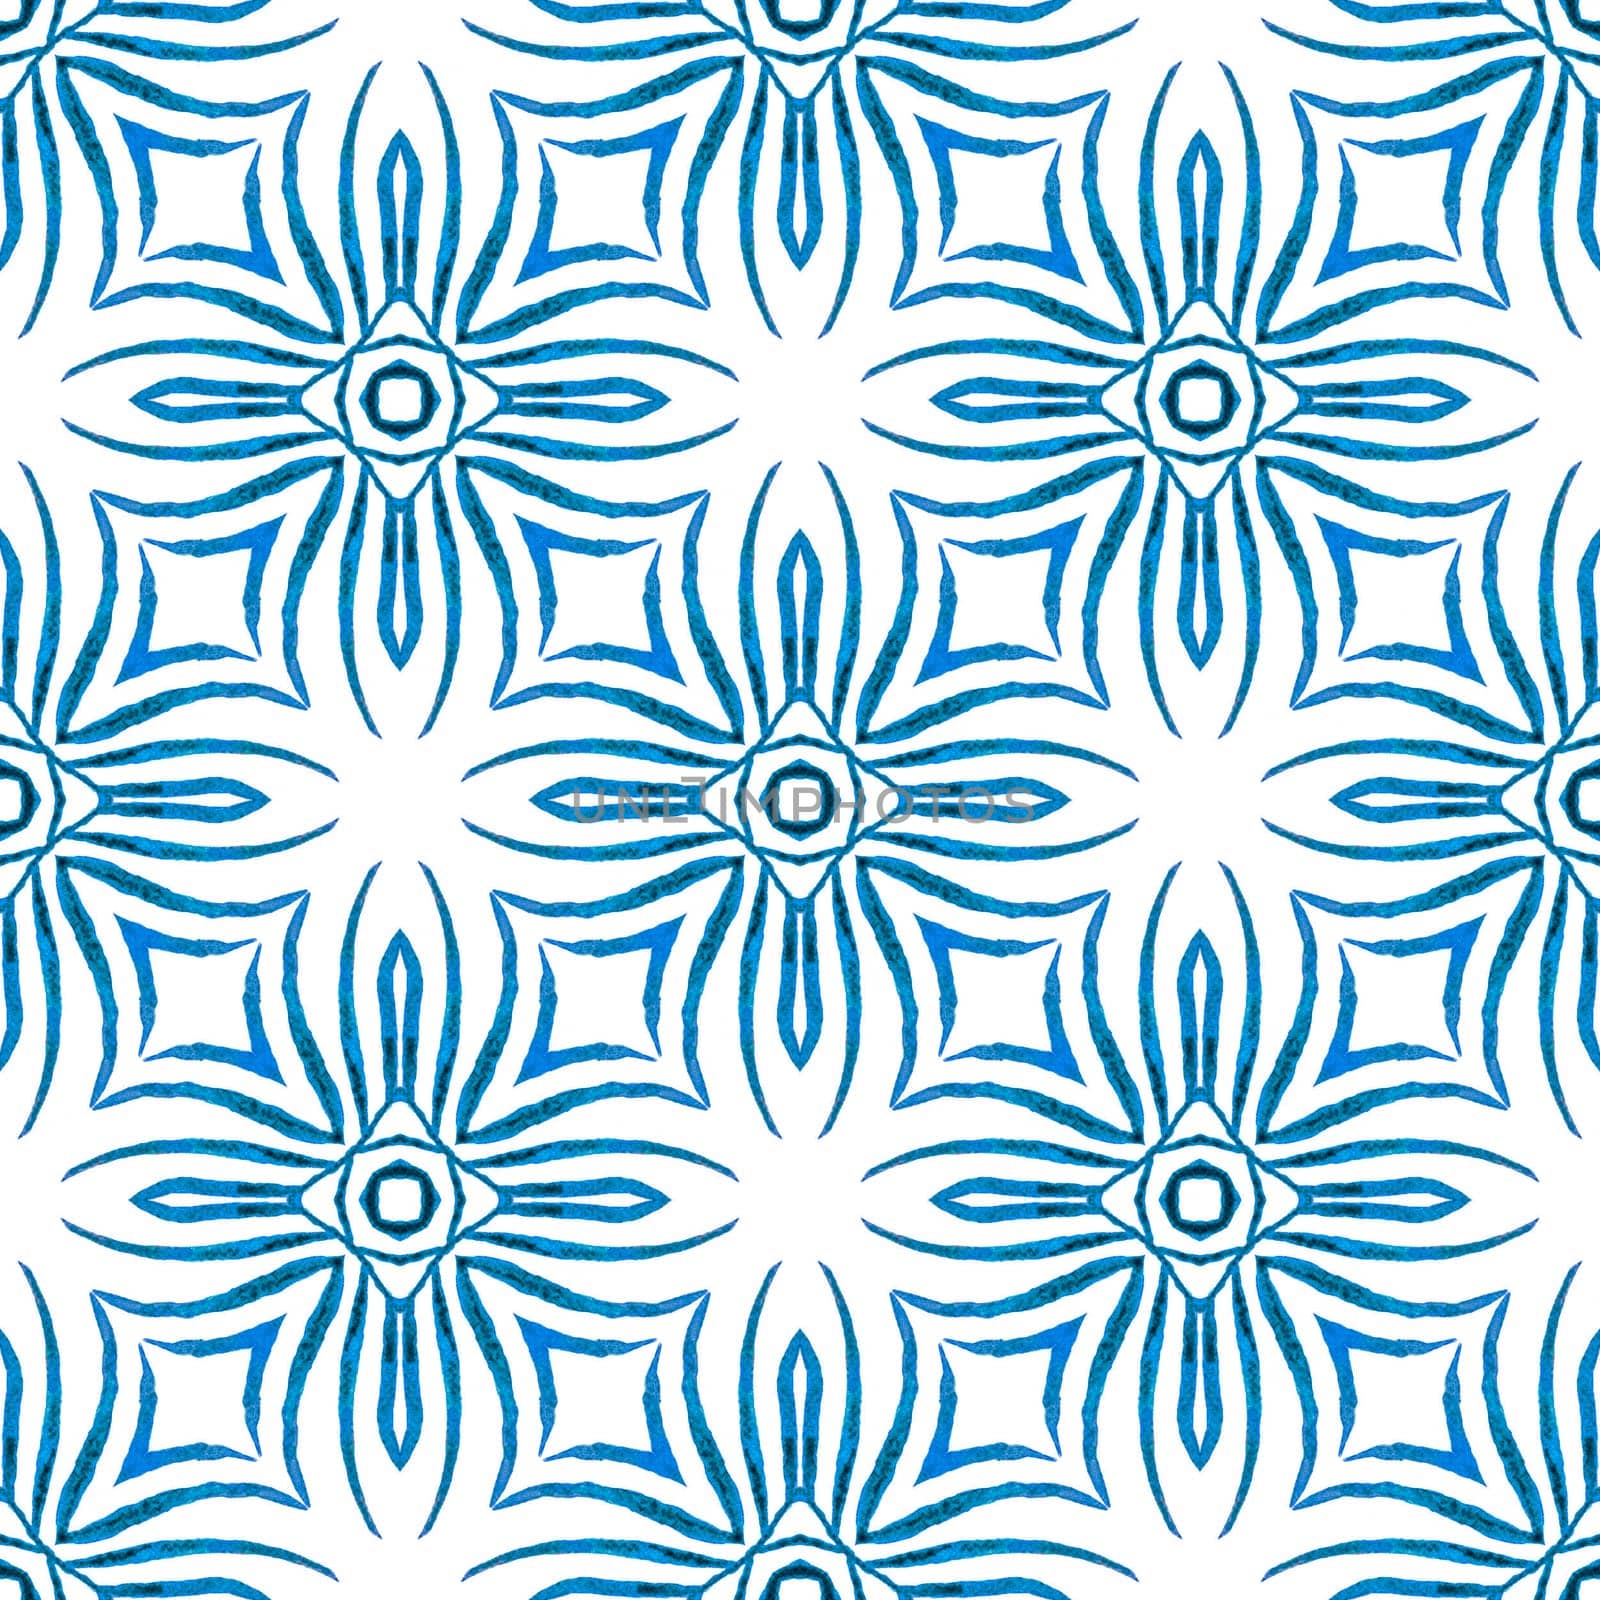 Textile ready sightly print, swimwear fabric, wallpaper, wrapping. Blue remarkable boho chic summer design. Ethnic hand painted pattern. Watercolor summer ethnic border pattern.